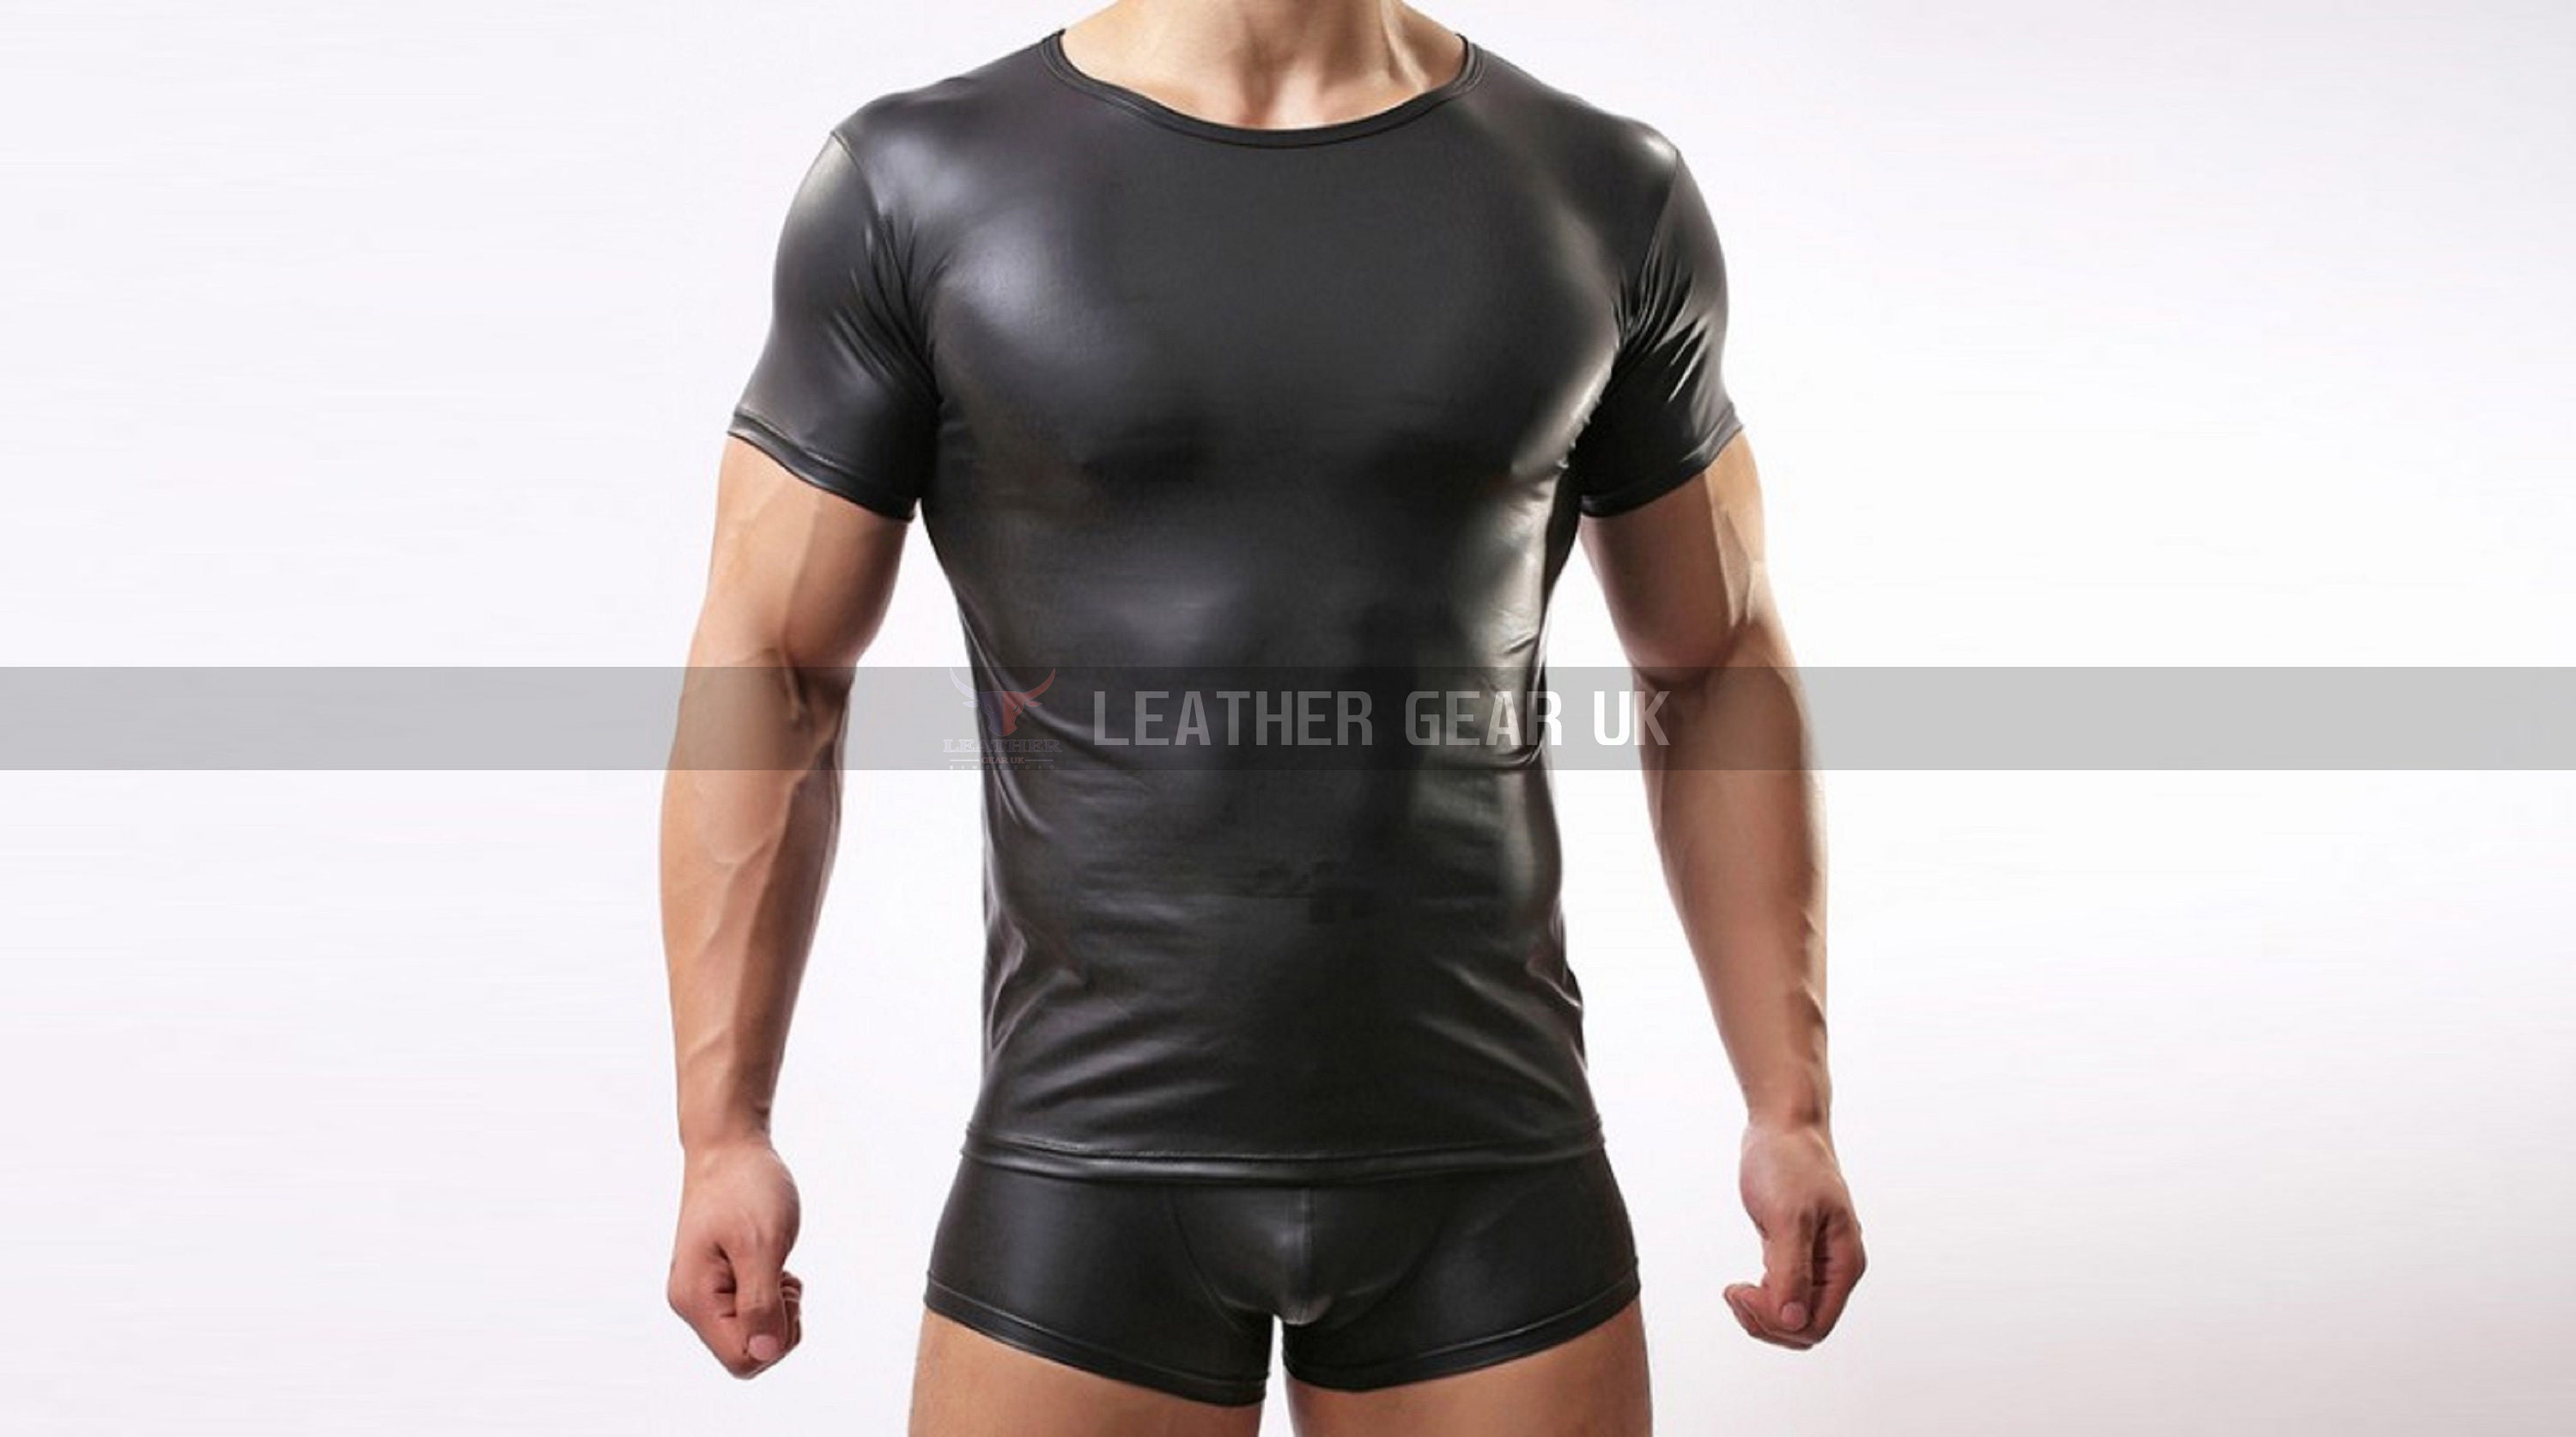 Black Leather Bodybuilder T Shirt Real Cow Leather Gym Shirt - Etsy